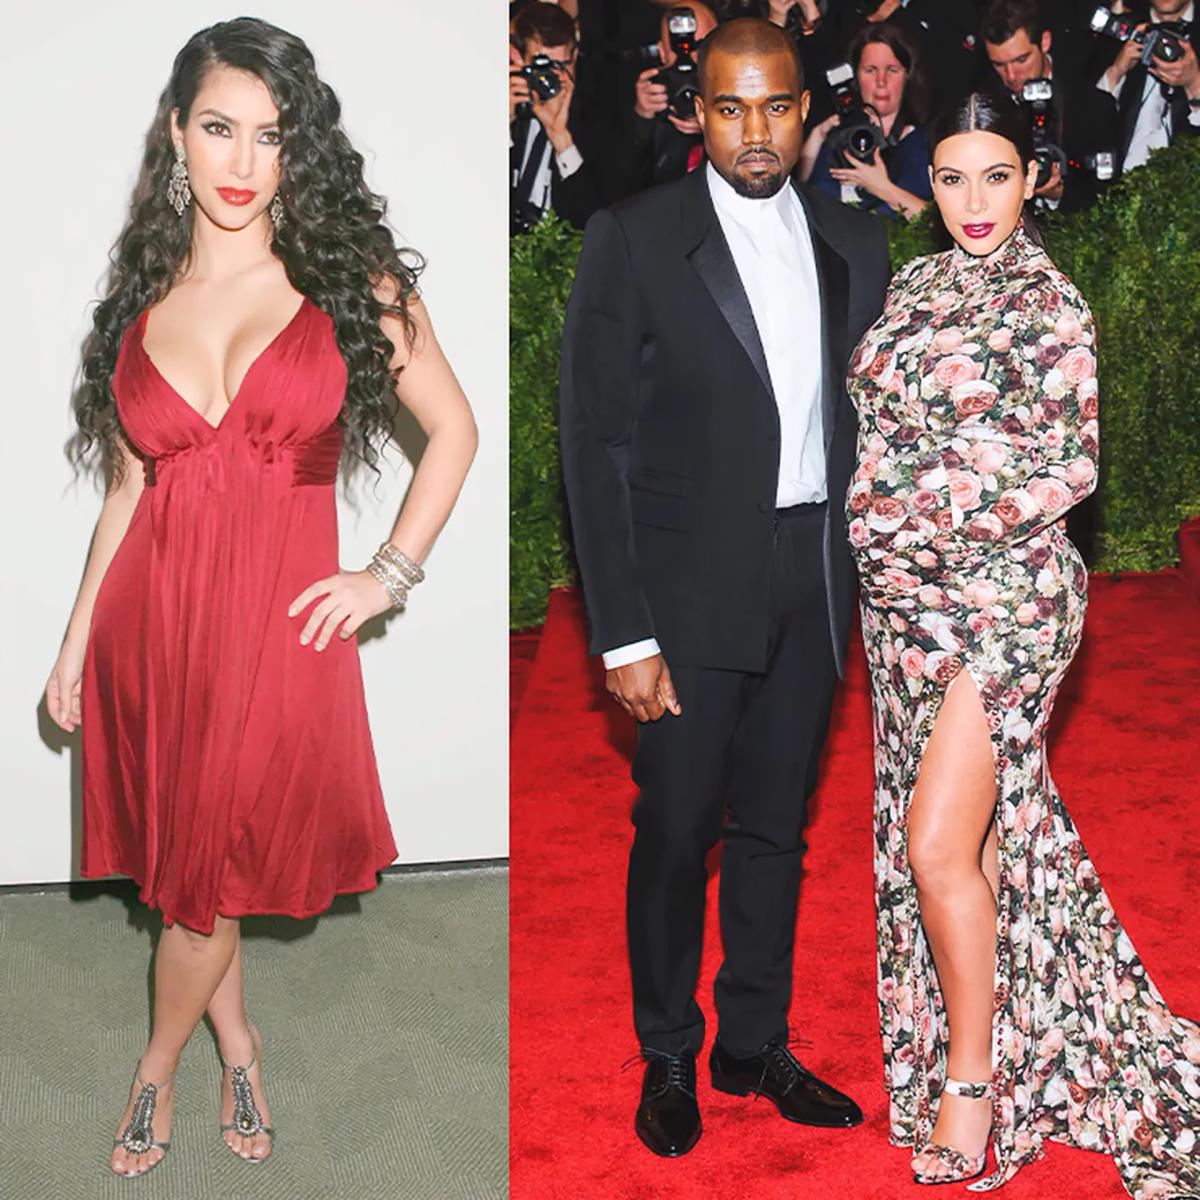 Biggest Celebrity Fashion Fails They Would Like Us to Forget About - image 1